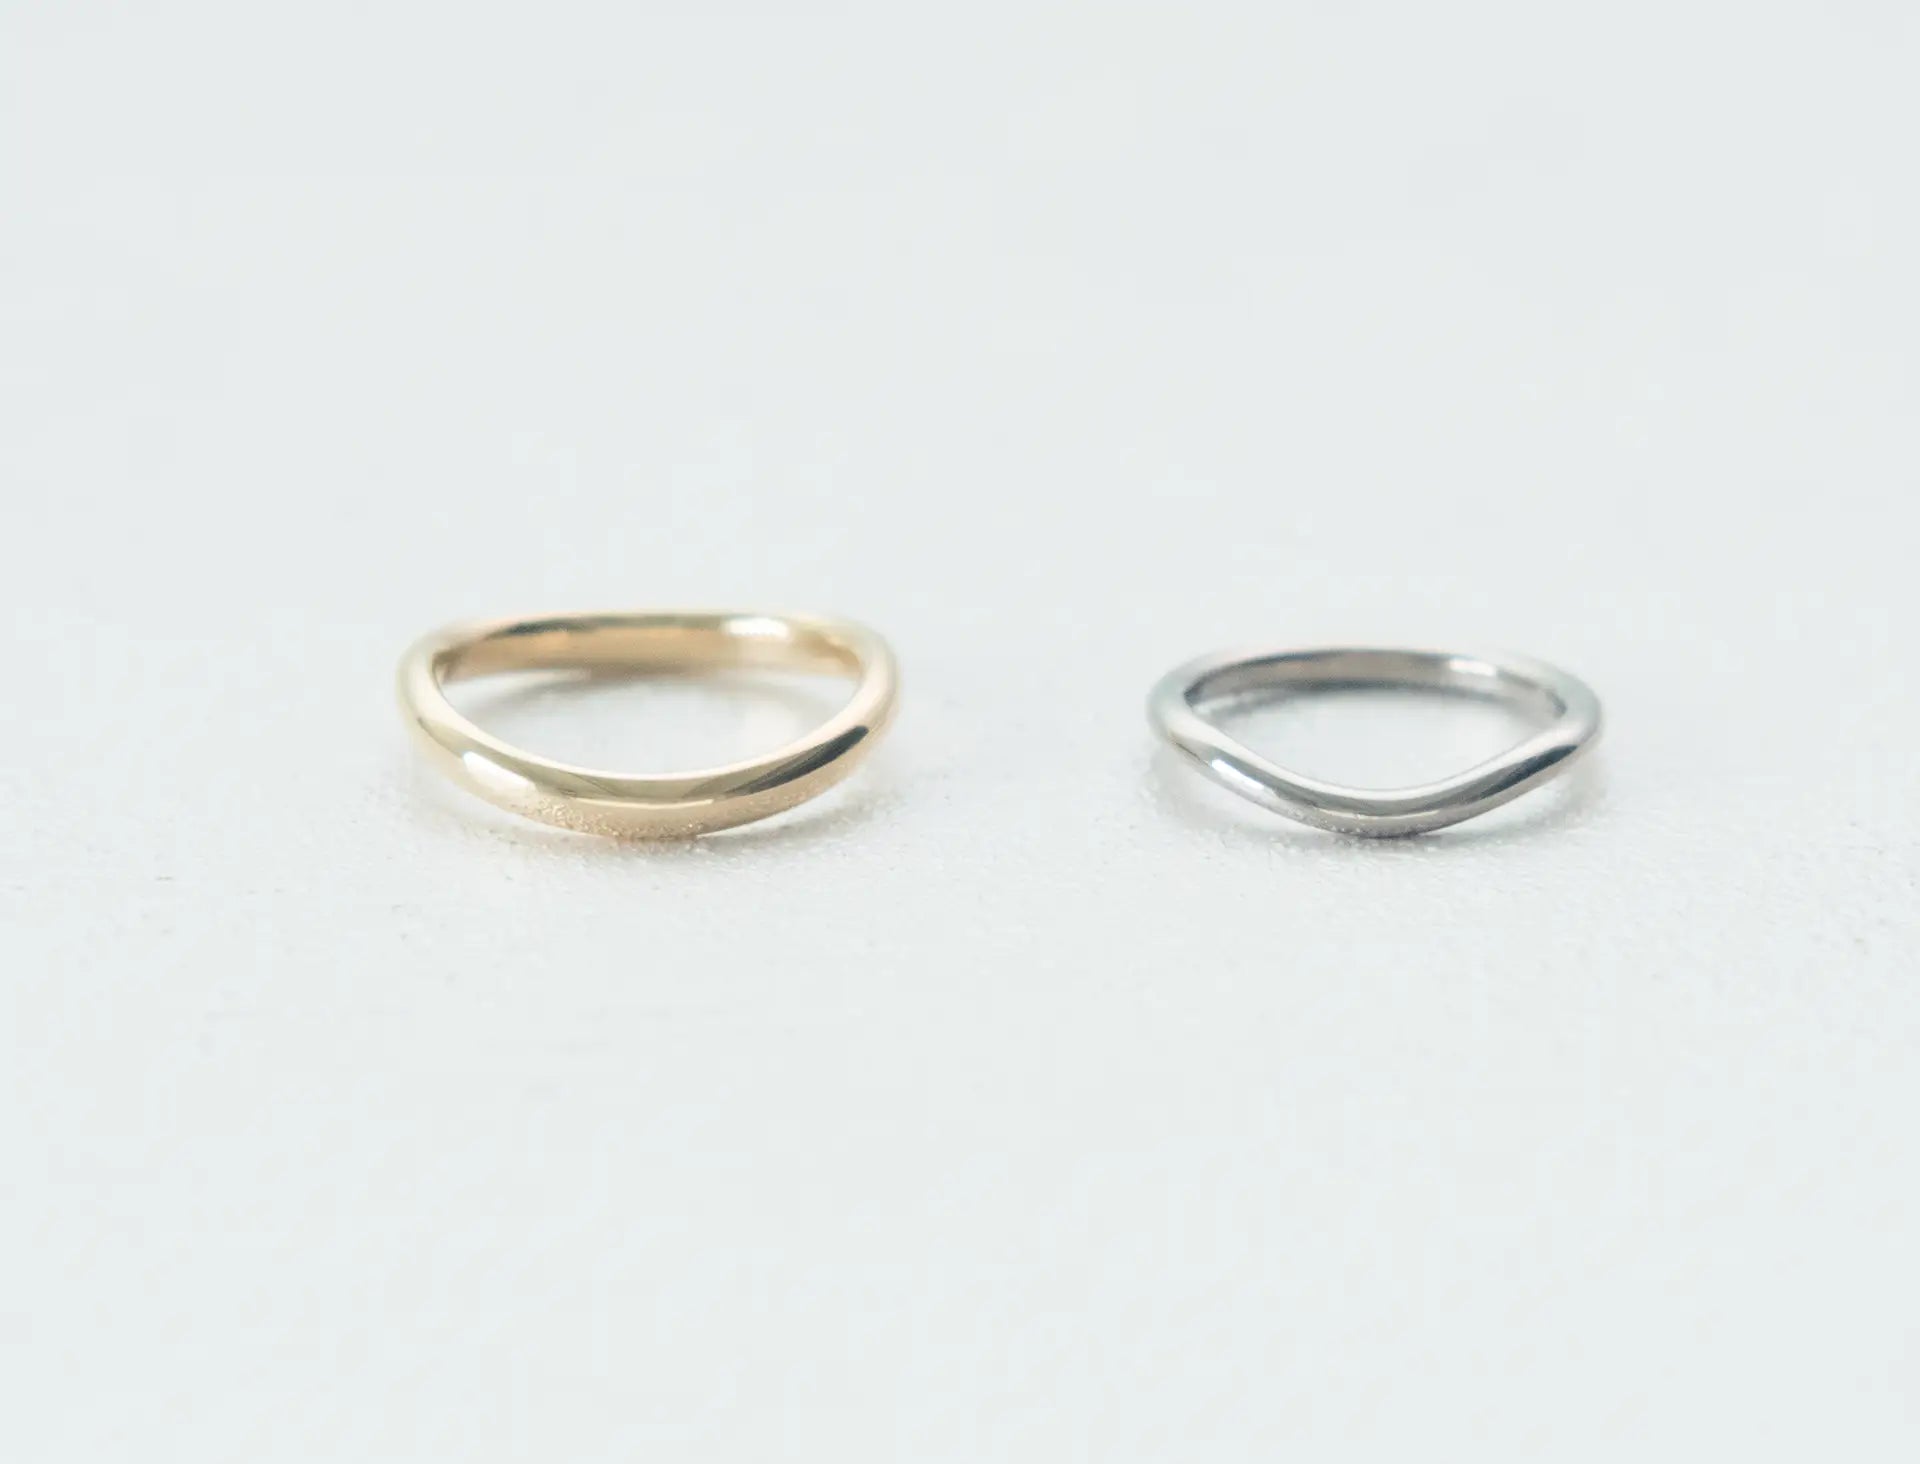 CURVE_YELLOW GOLD × CURVE_NATURAL WHITE GOLD